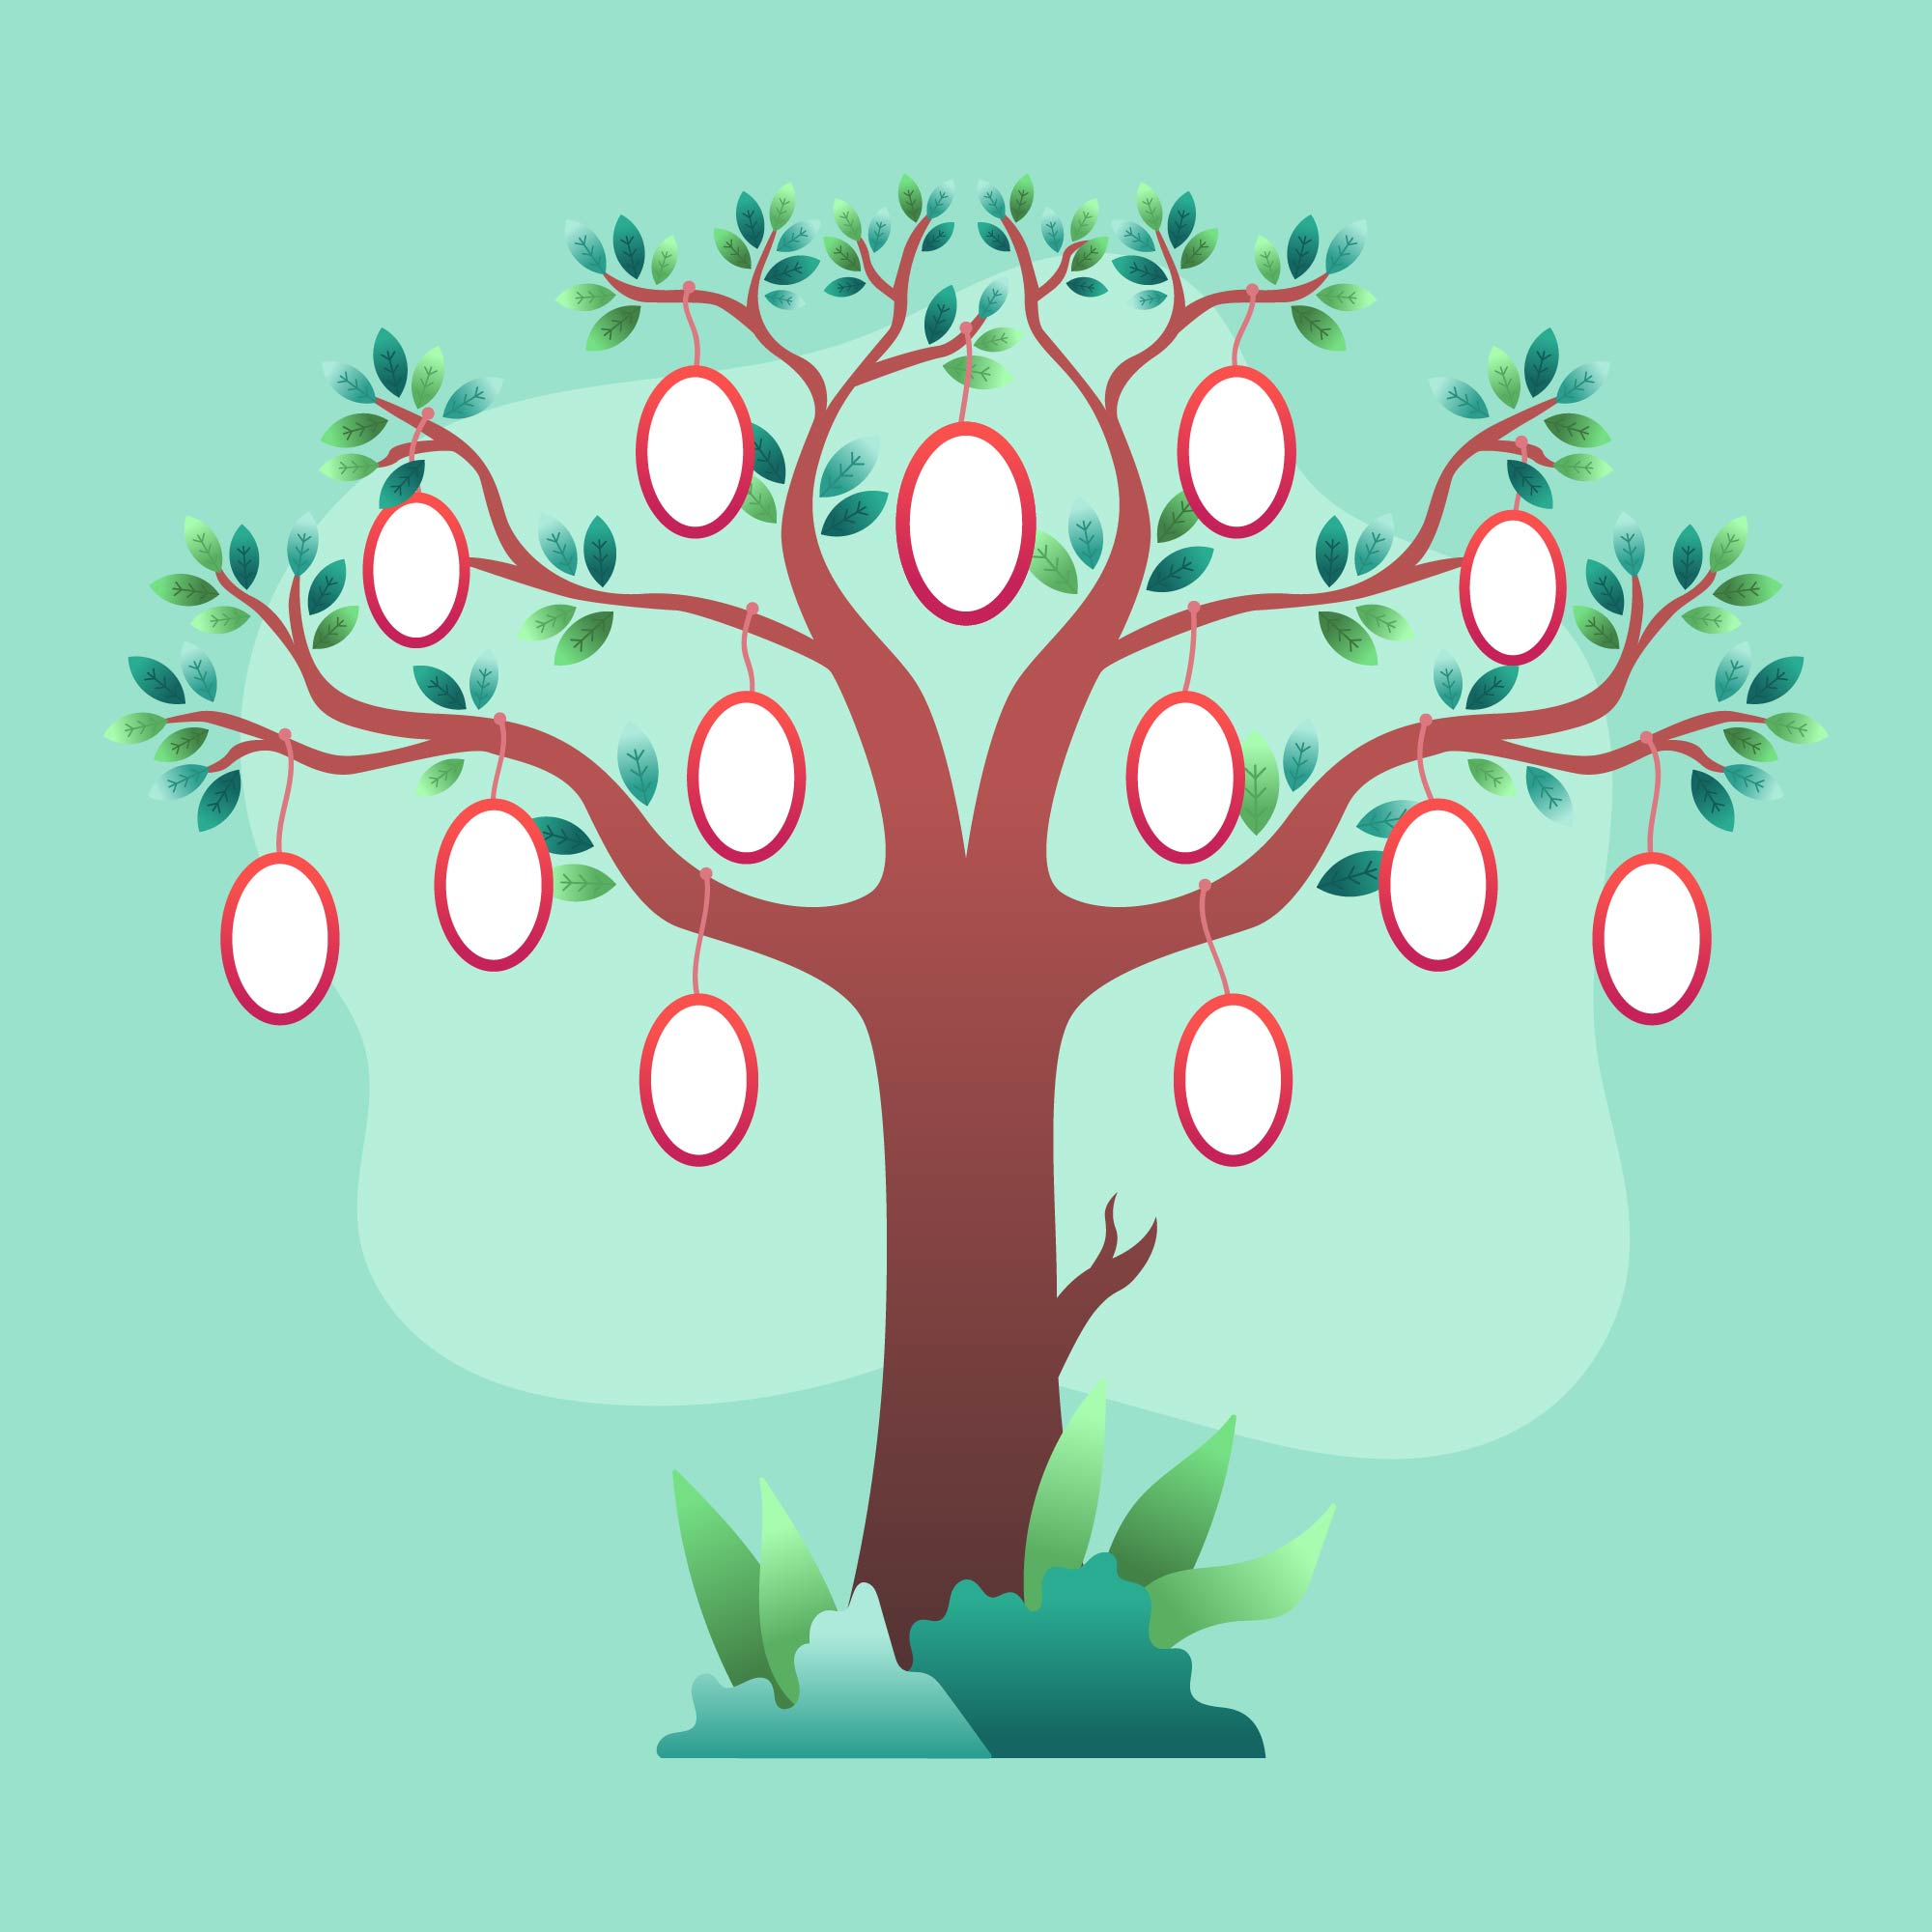 Family Tree Template Vector 542200 - Download Free Vectors ...